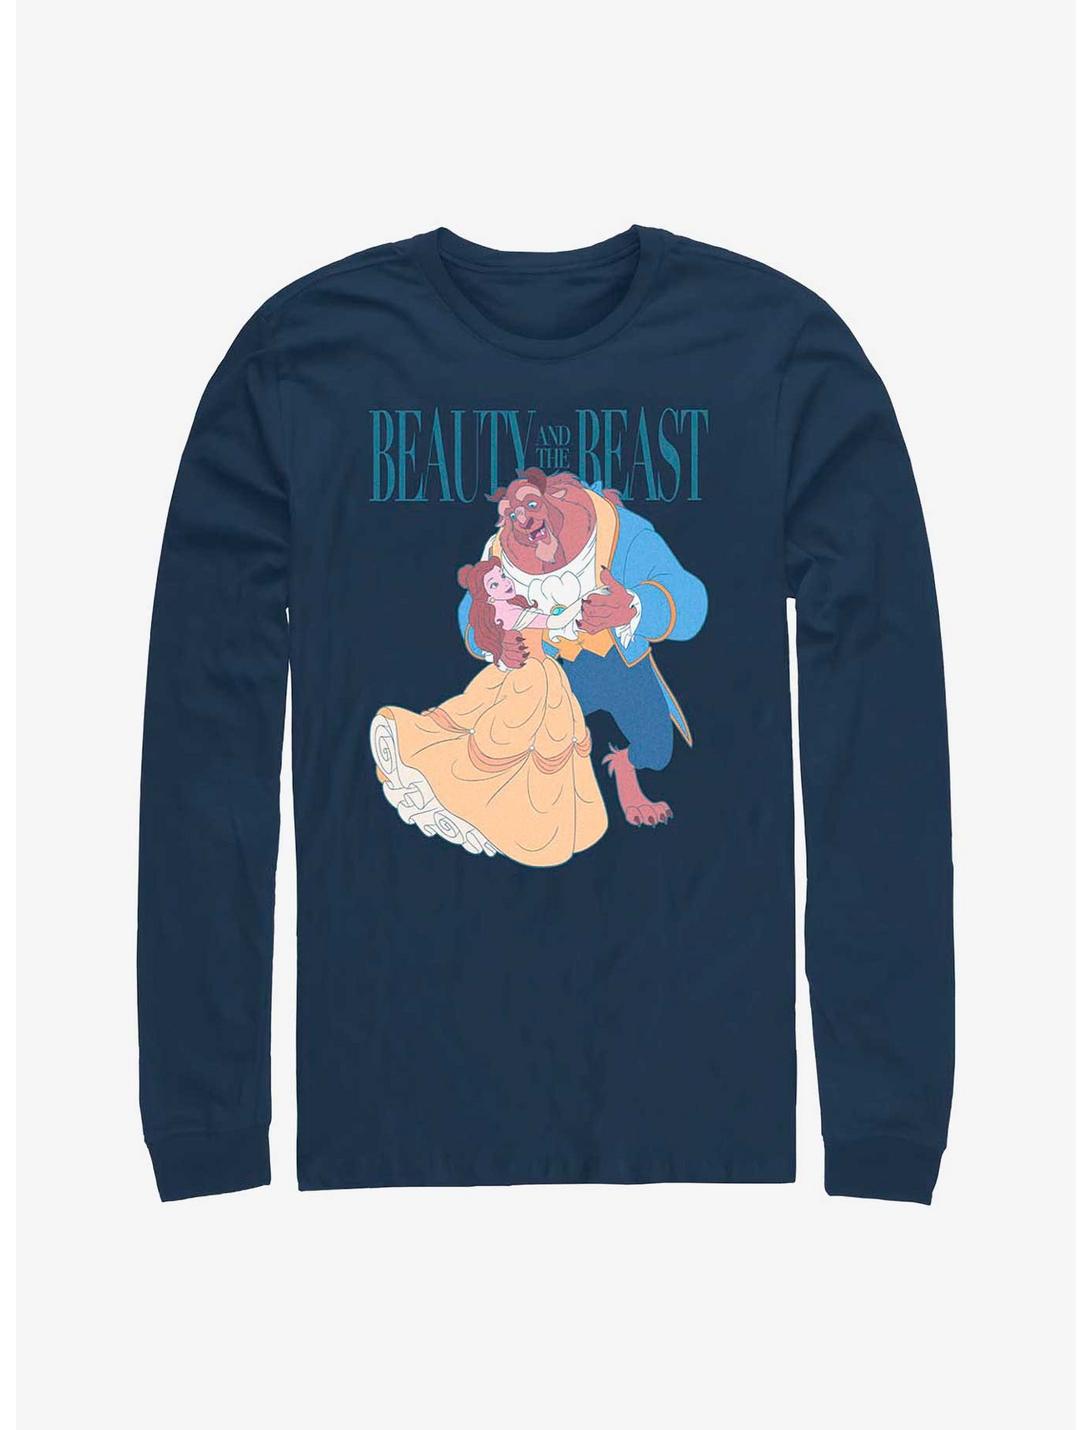 Disney Beauty And The Beast Vintage Dance Long-Sleeve T-Shirt, NAVY, hi-res